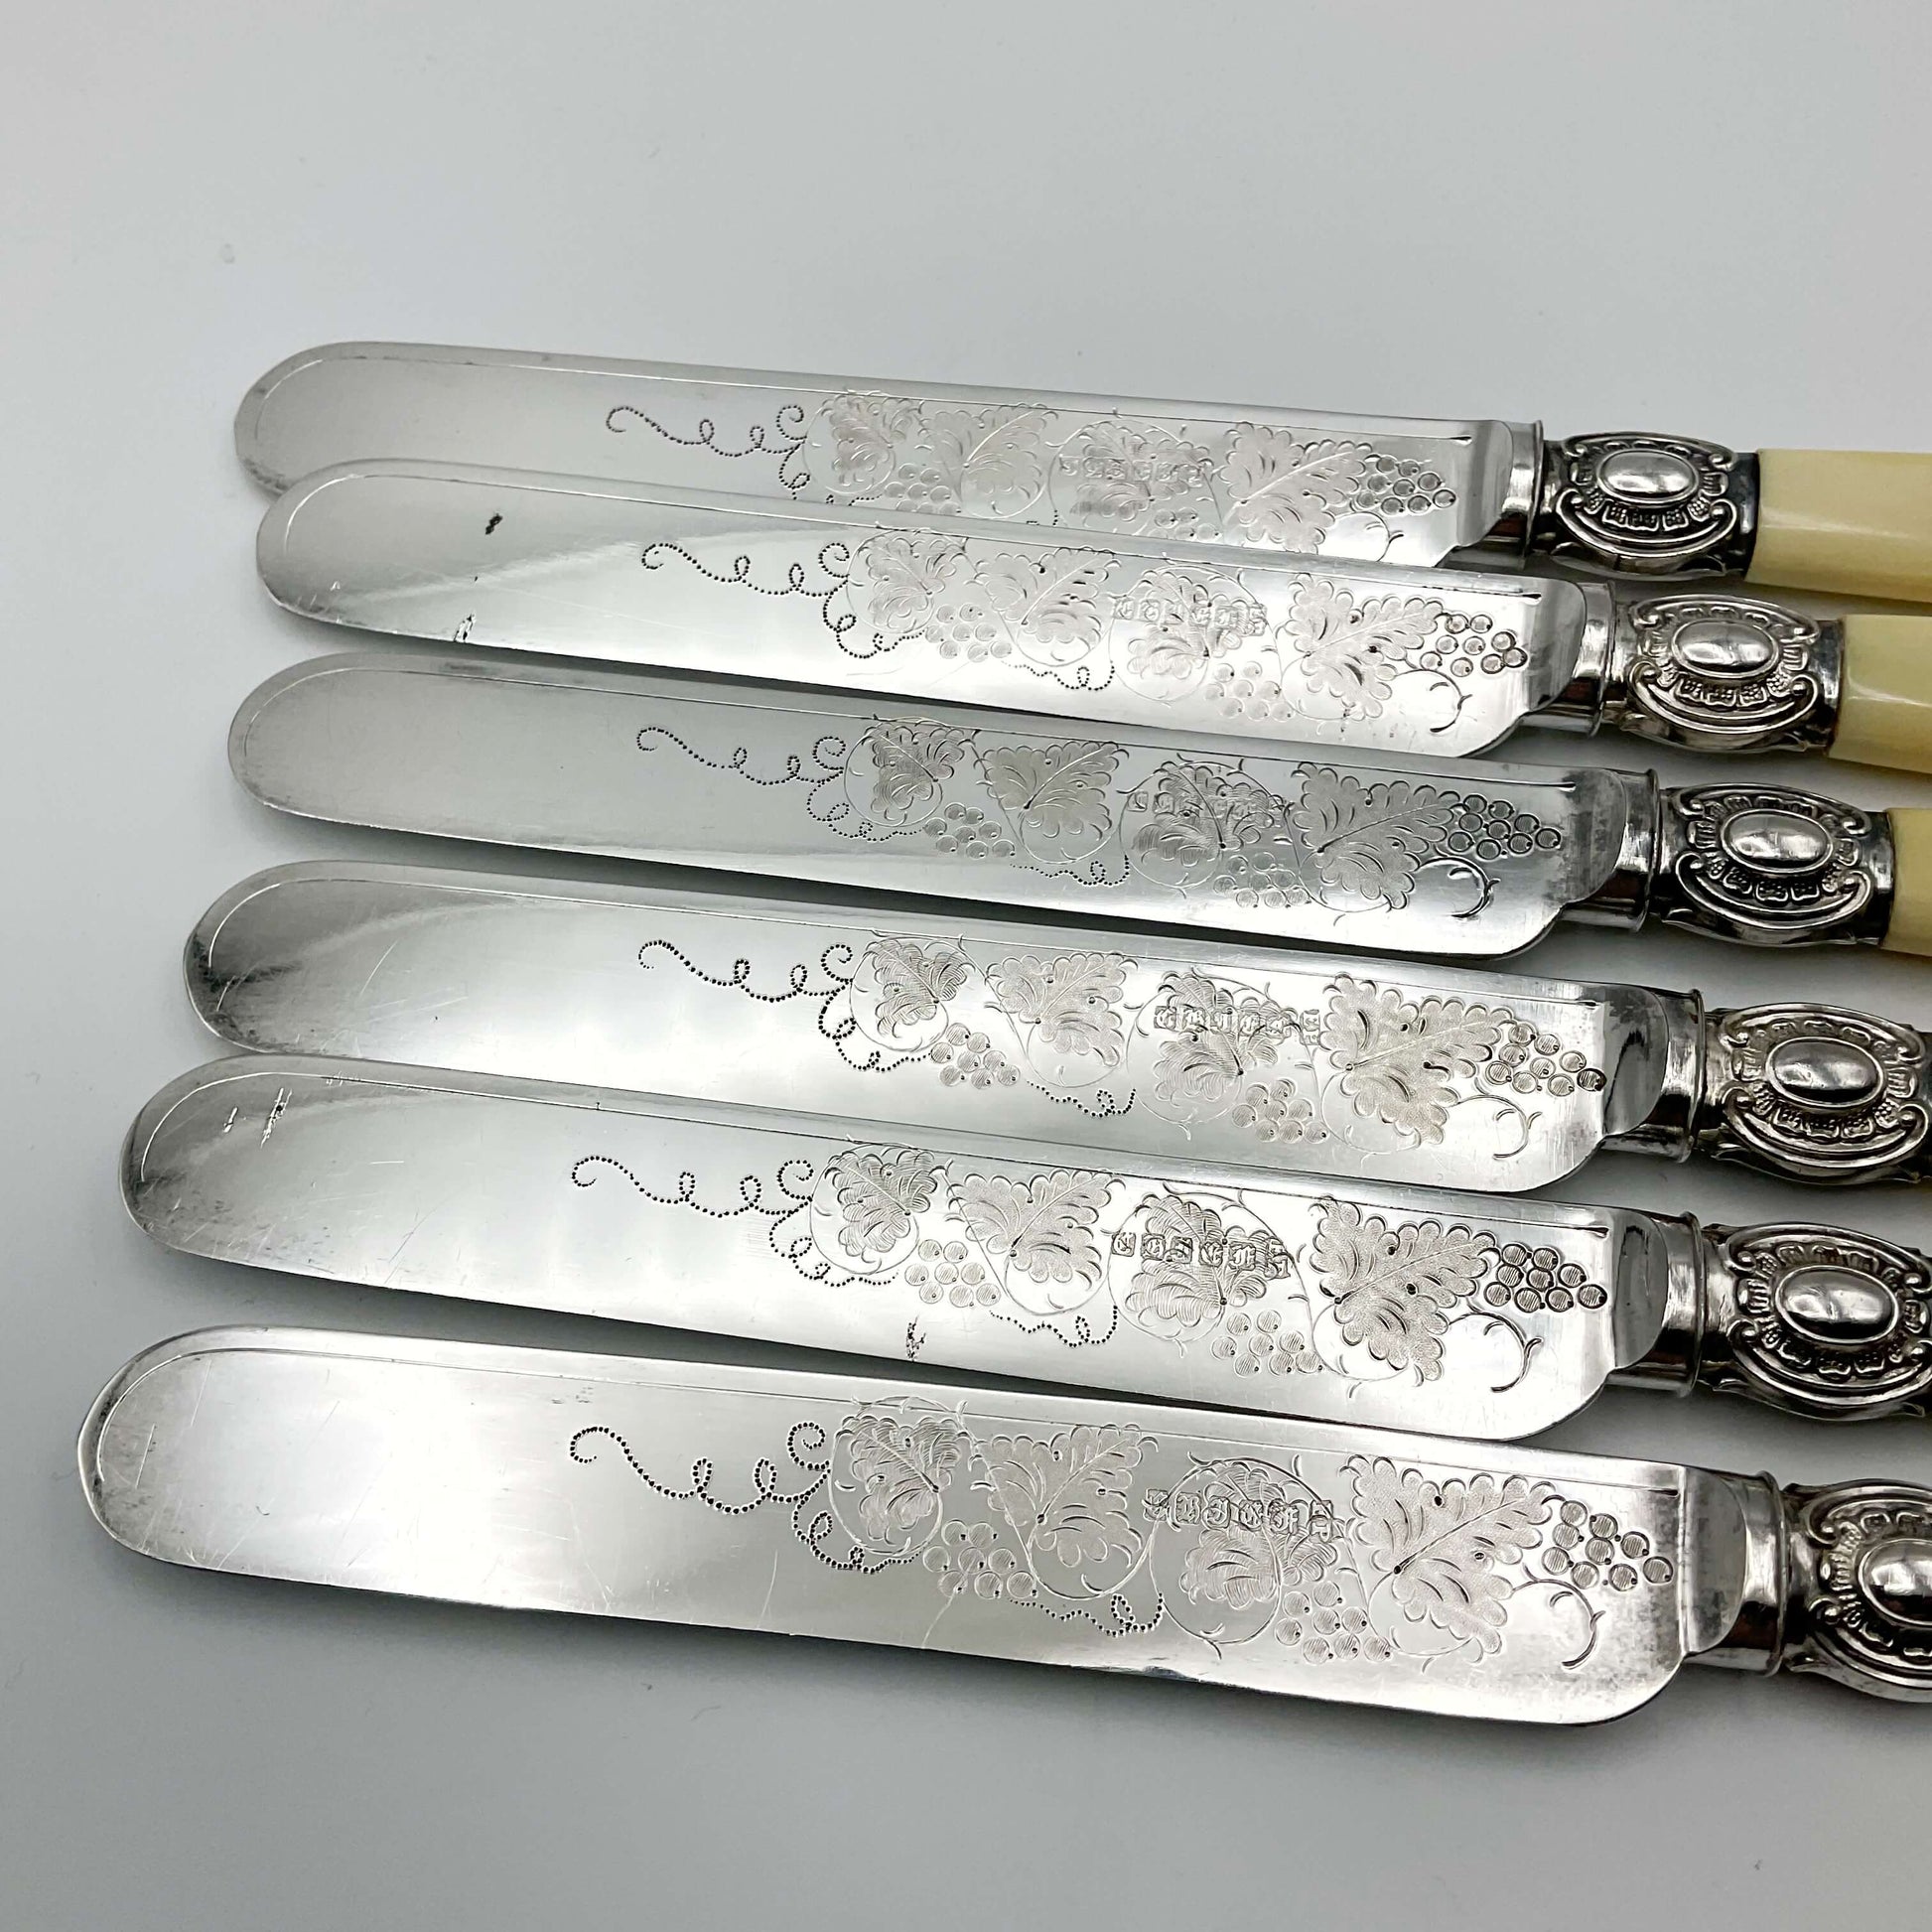 Shiny silver plated round knife blades with a grape and vine engraved design